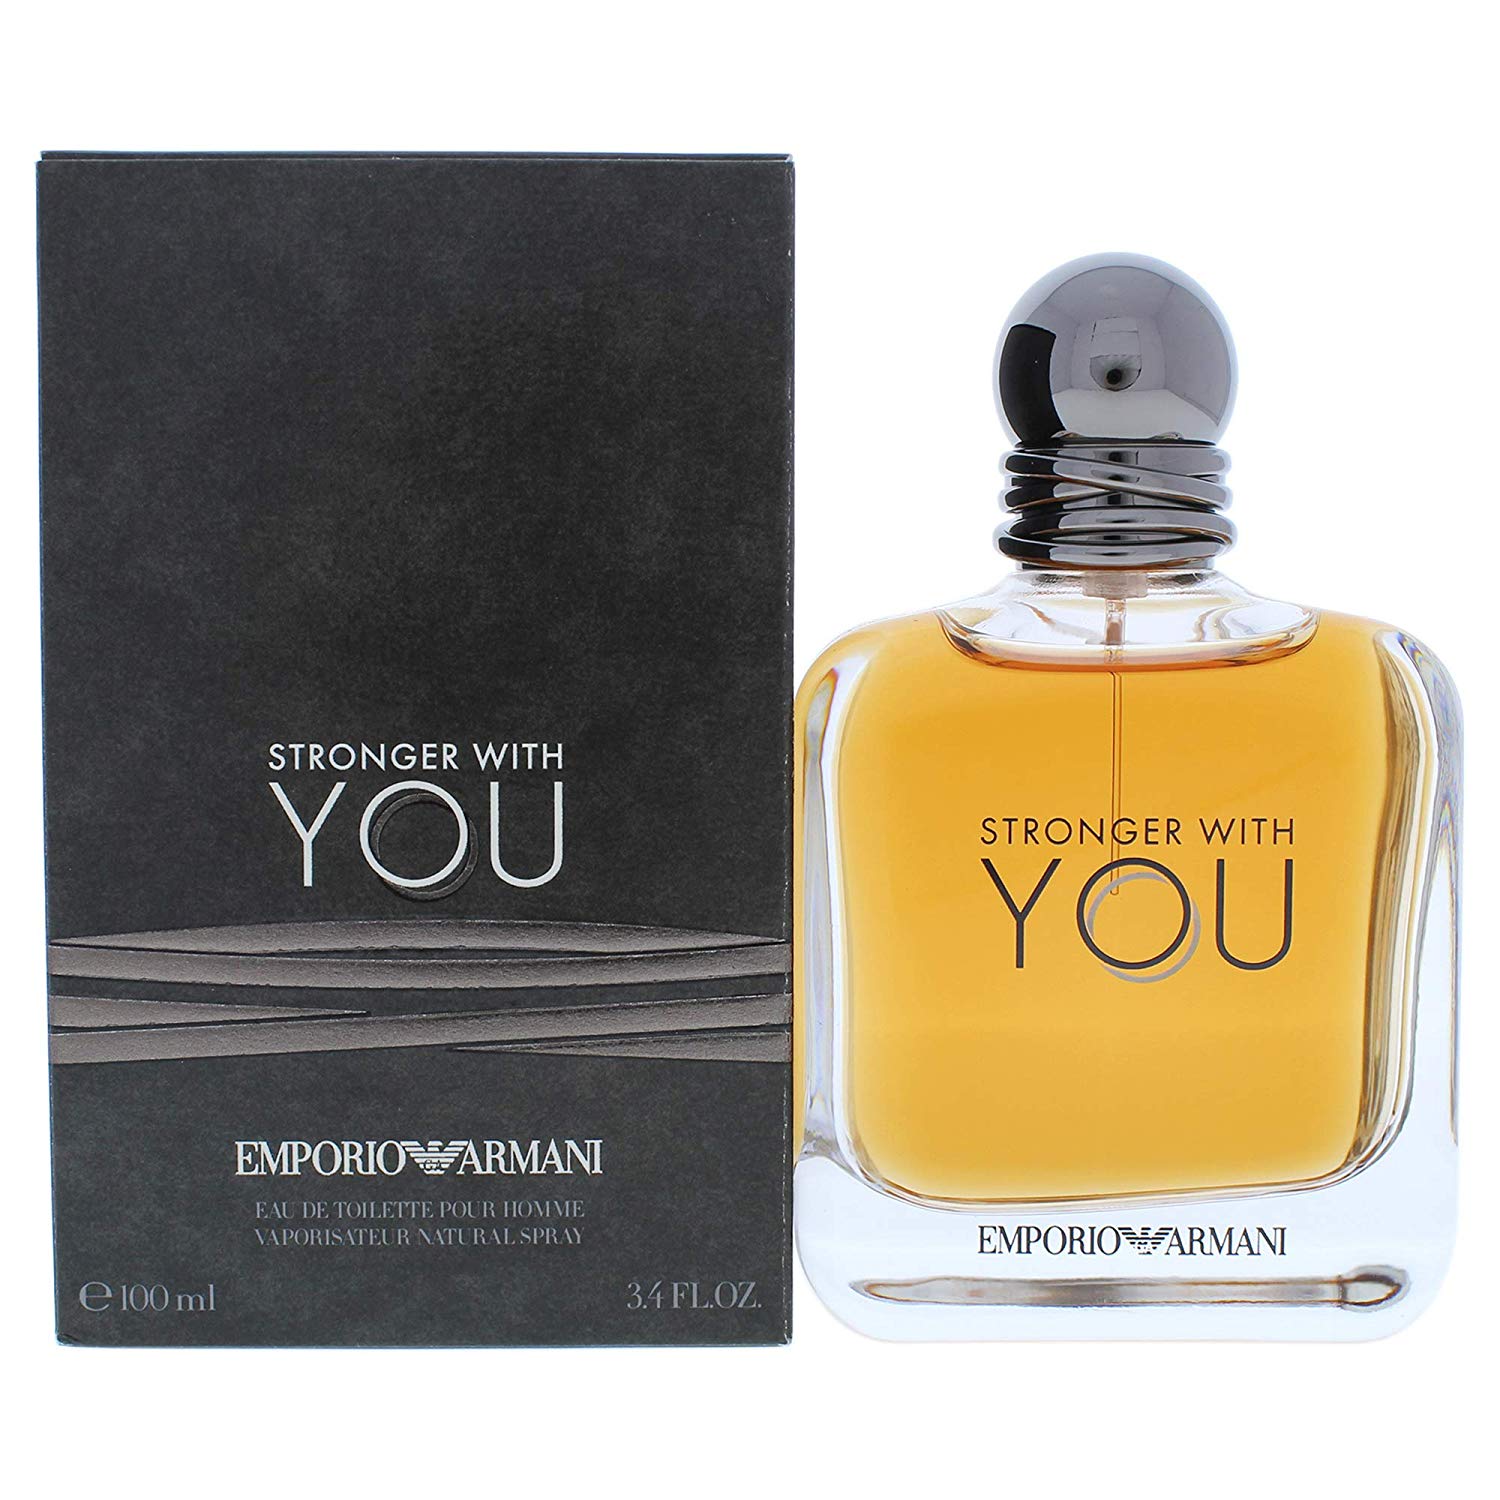 Stronger with you by Emporio Armani